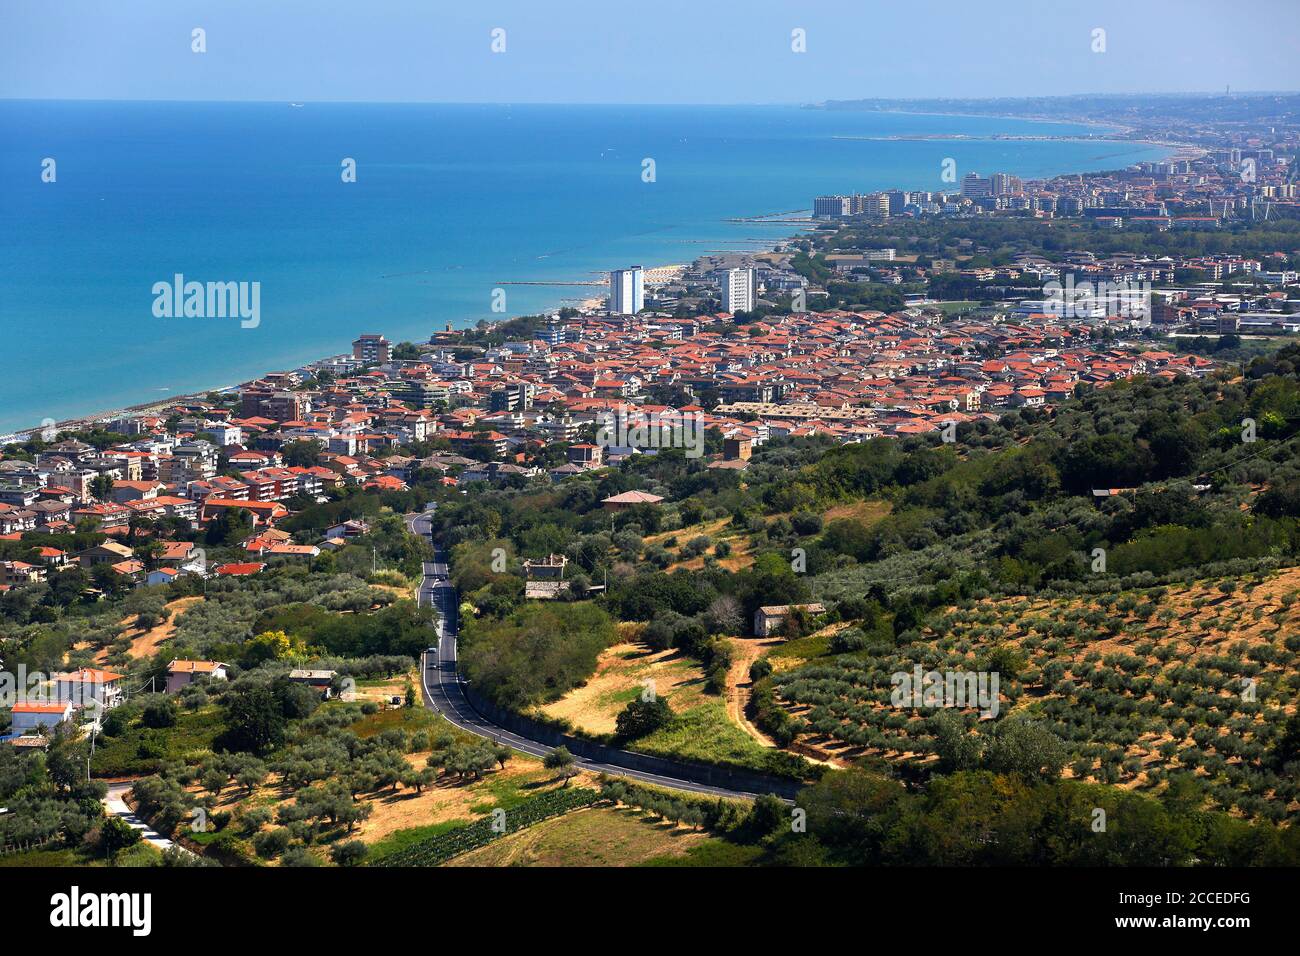 Silvi Marina and the Adriatic Sea seen from Silvi Paese, Abruzzo, Italy. The view is looking south east down the coast towards Pescara. Stock Photo